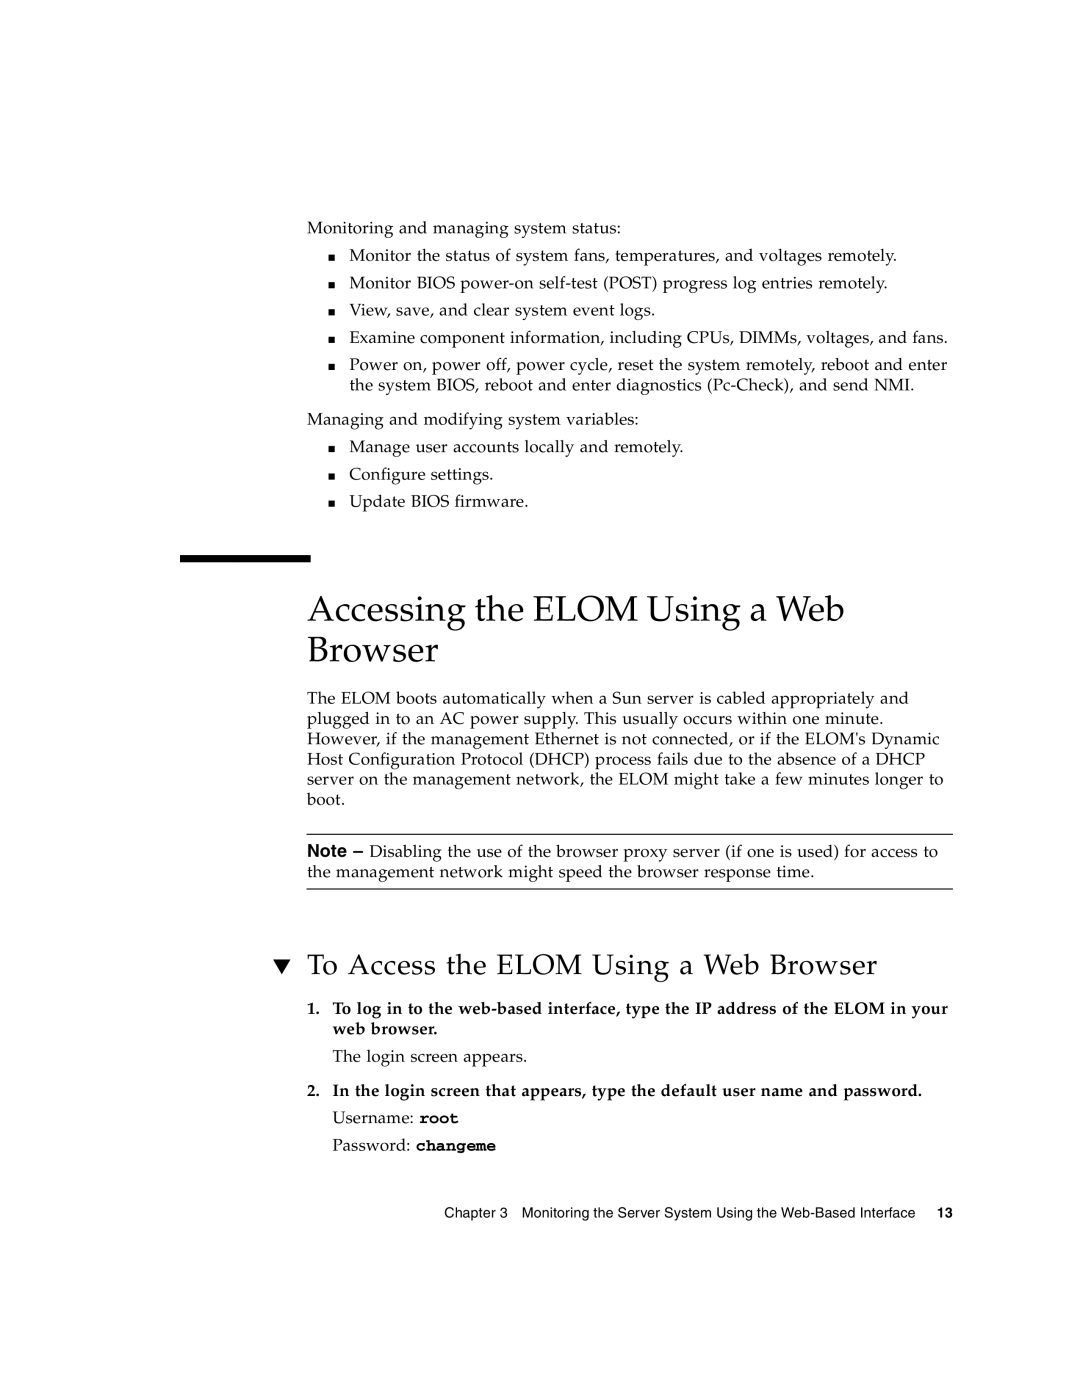 Sun Microsystems X4150 manual Accessing the ELOM Using a Web Browser, To Access the ELOM Using a Web Browser 